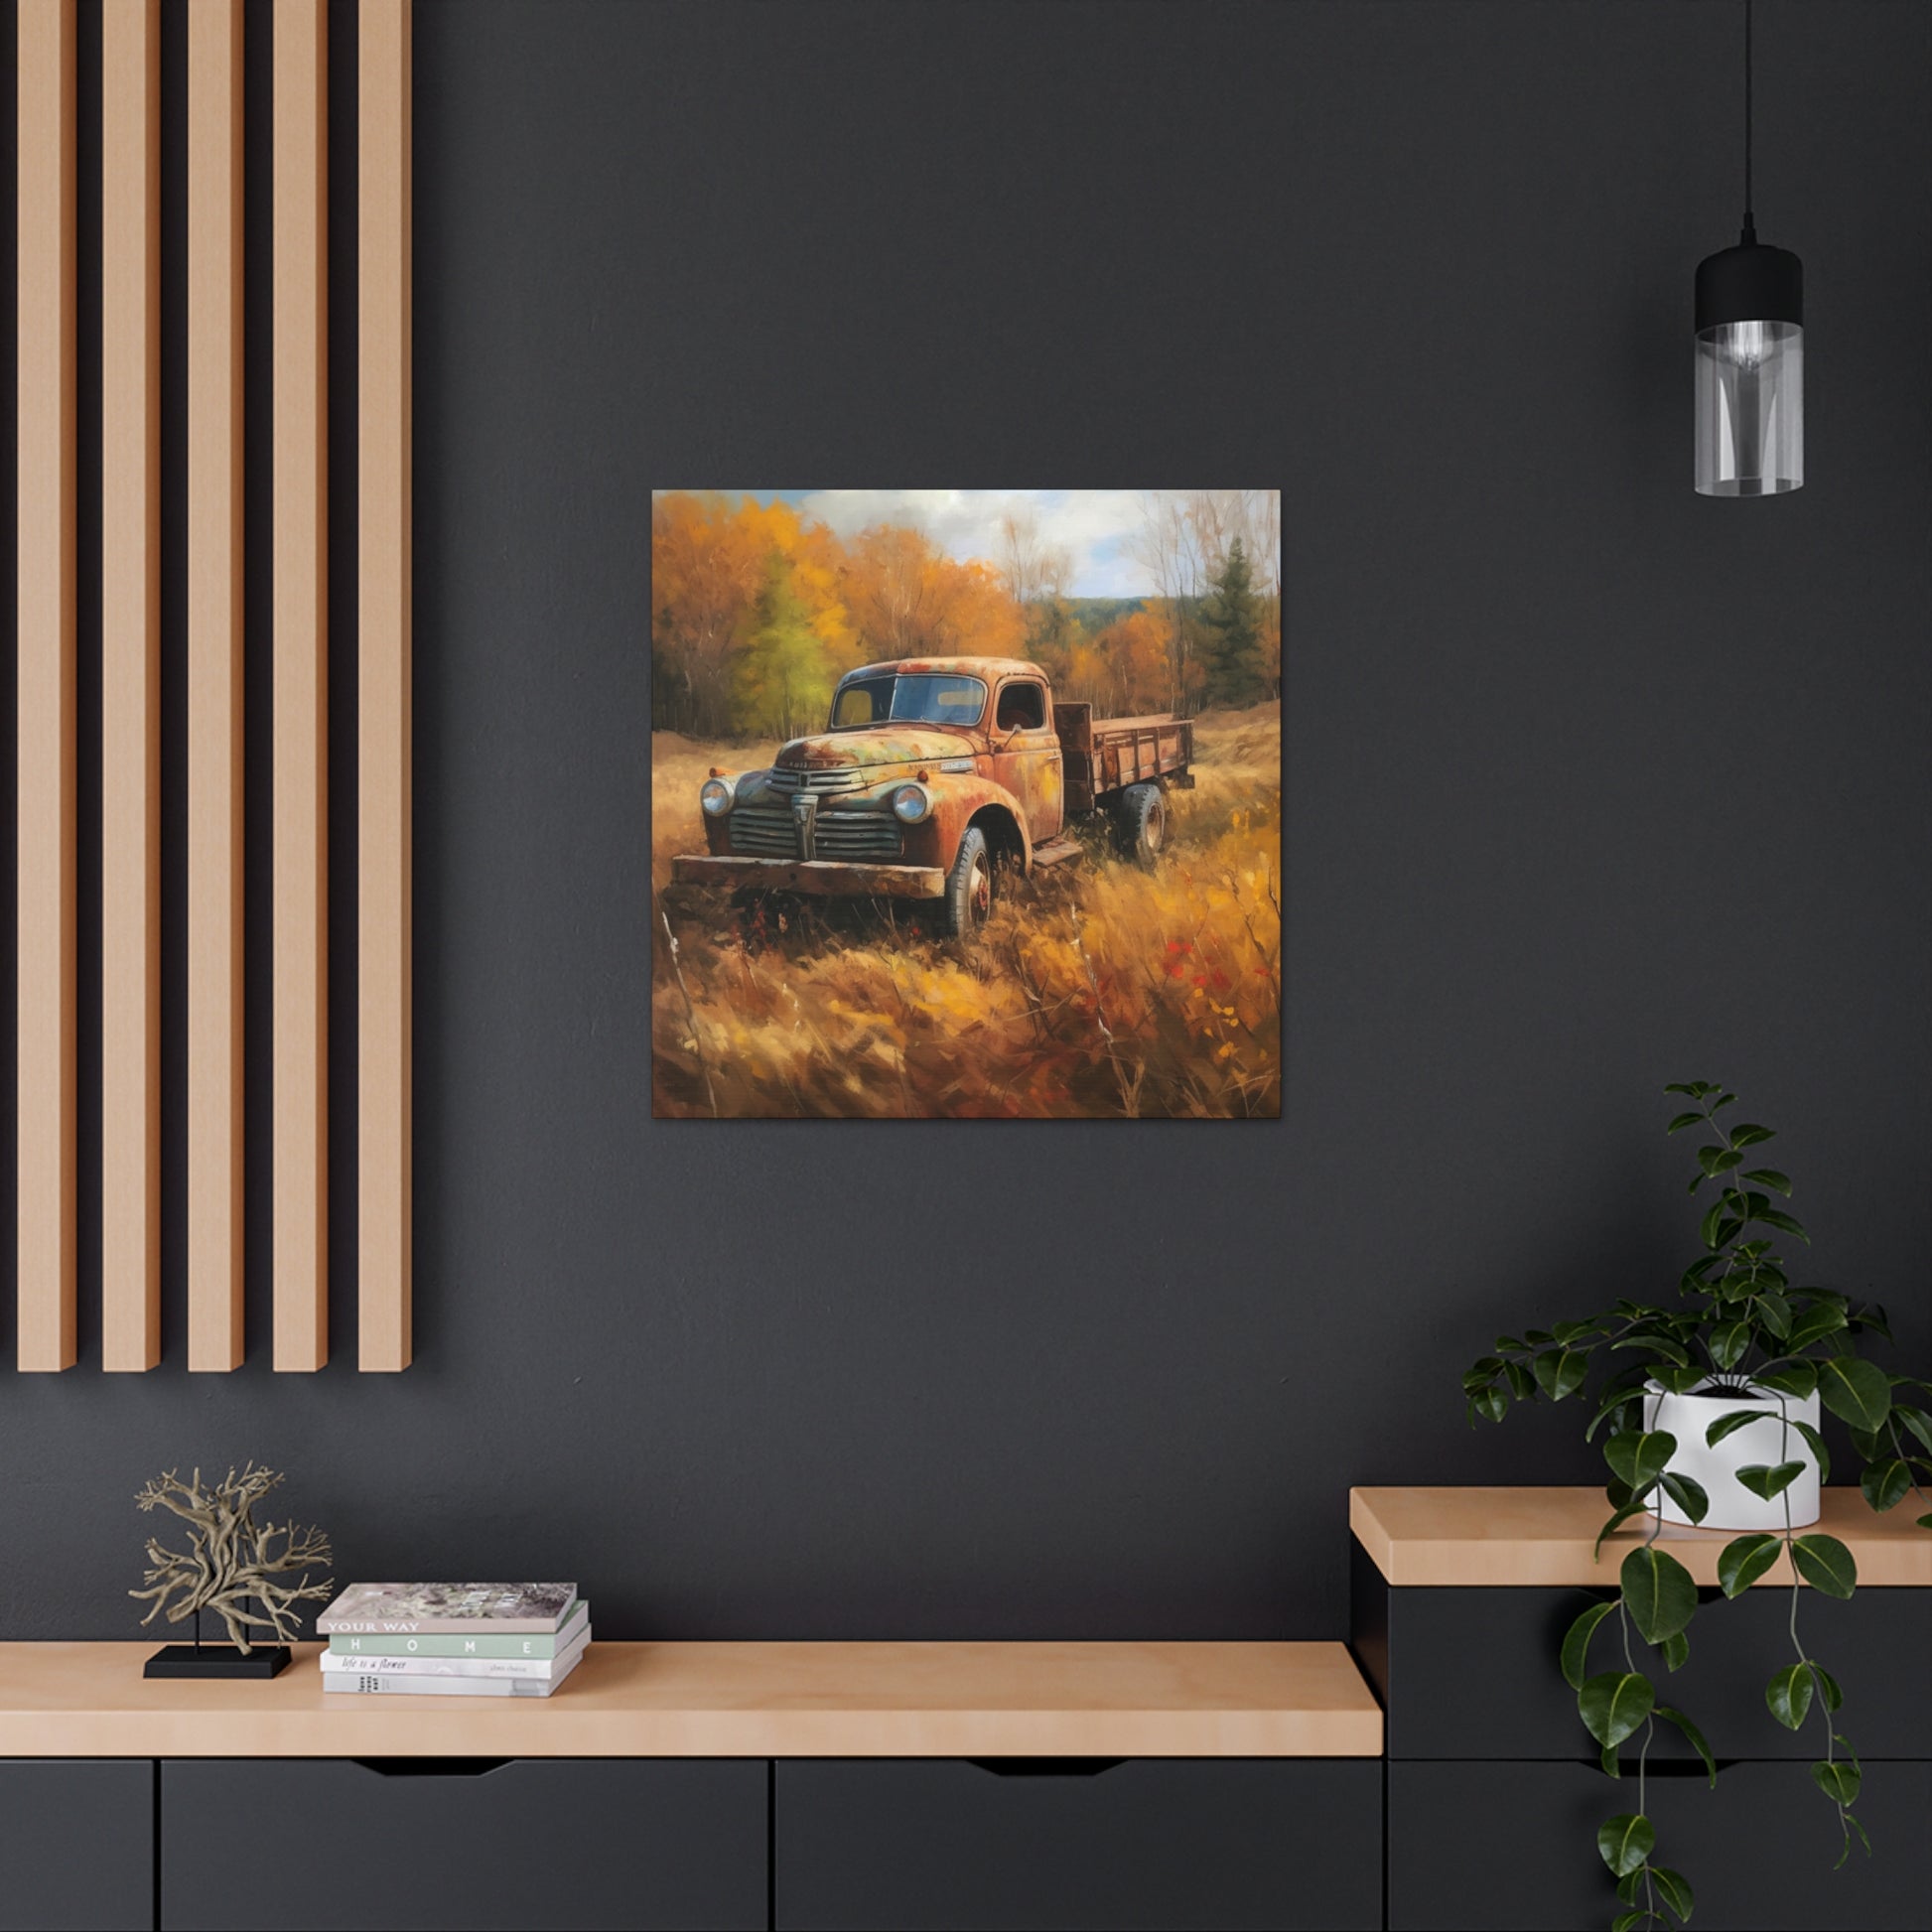 "Fall Farm Rustic Truck" Wall Art - Weave Got Gifts - Unique Gifts You Won’t Find Anywhere Else!